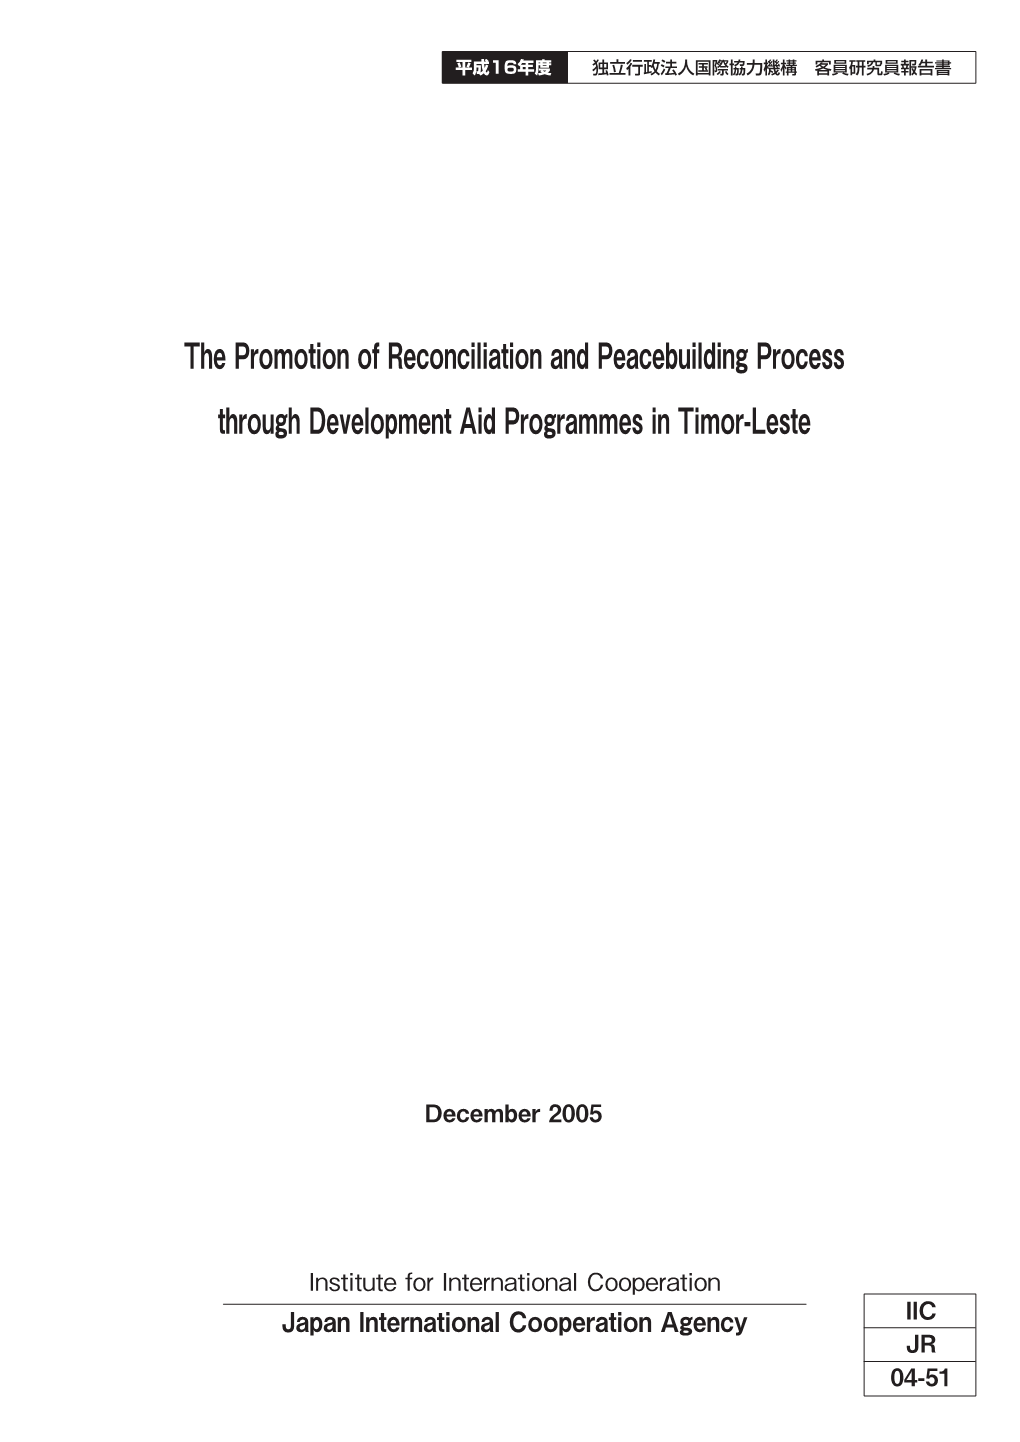 The Promotion of Reconciliation and Peacebuilding Process Through Development Aid Programmes in Timor-Leste